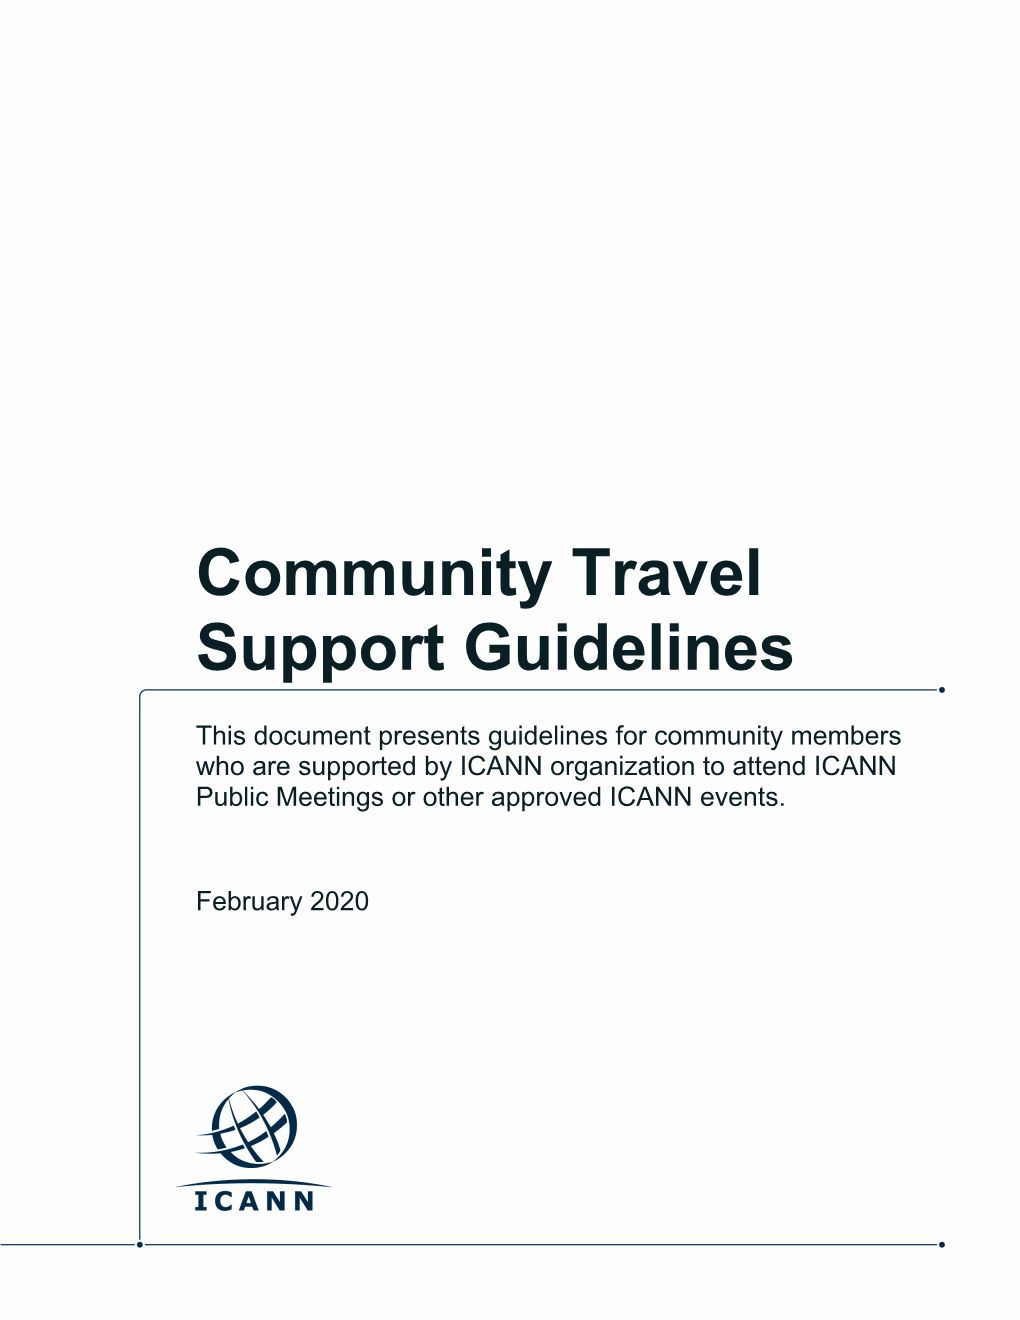 Community Travel Support Guidelines